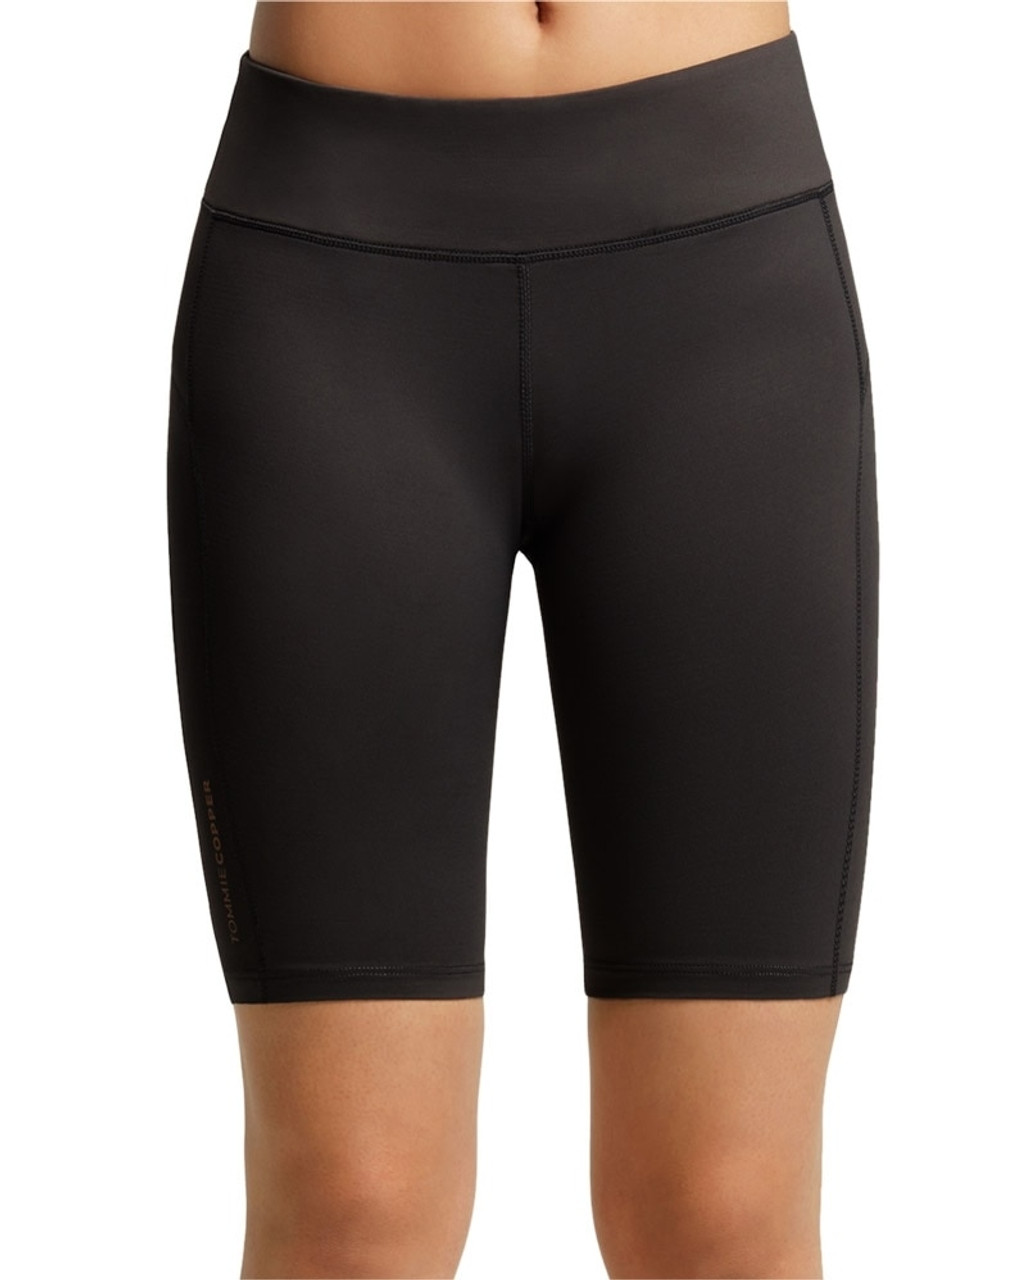 Tommie Copper Womens Performance Compression Shorts Womens Performance Compression Shorts